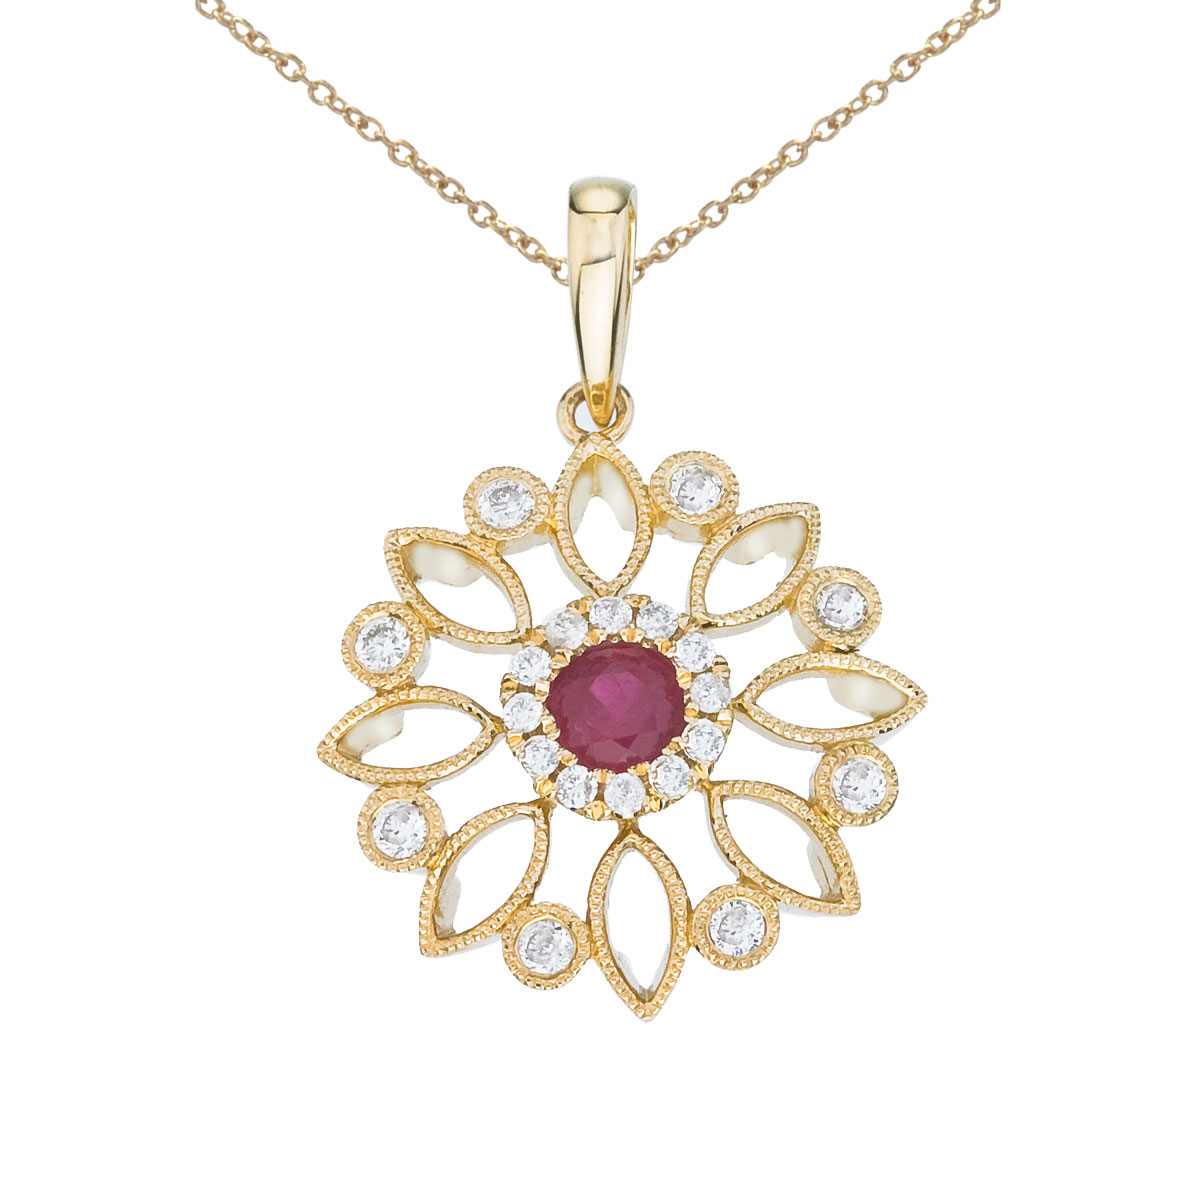 JCX2569: Flower shaped pendant set in 14k yellow gold with a radiant 4 mm ruby and .19 ct diamonds.